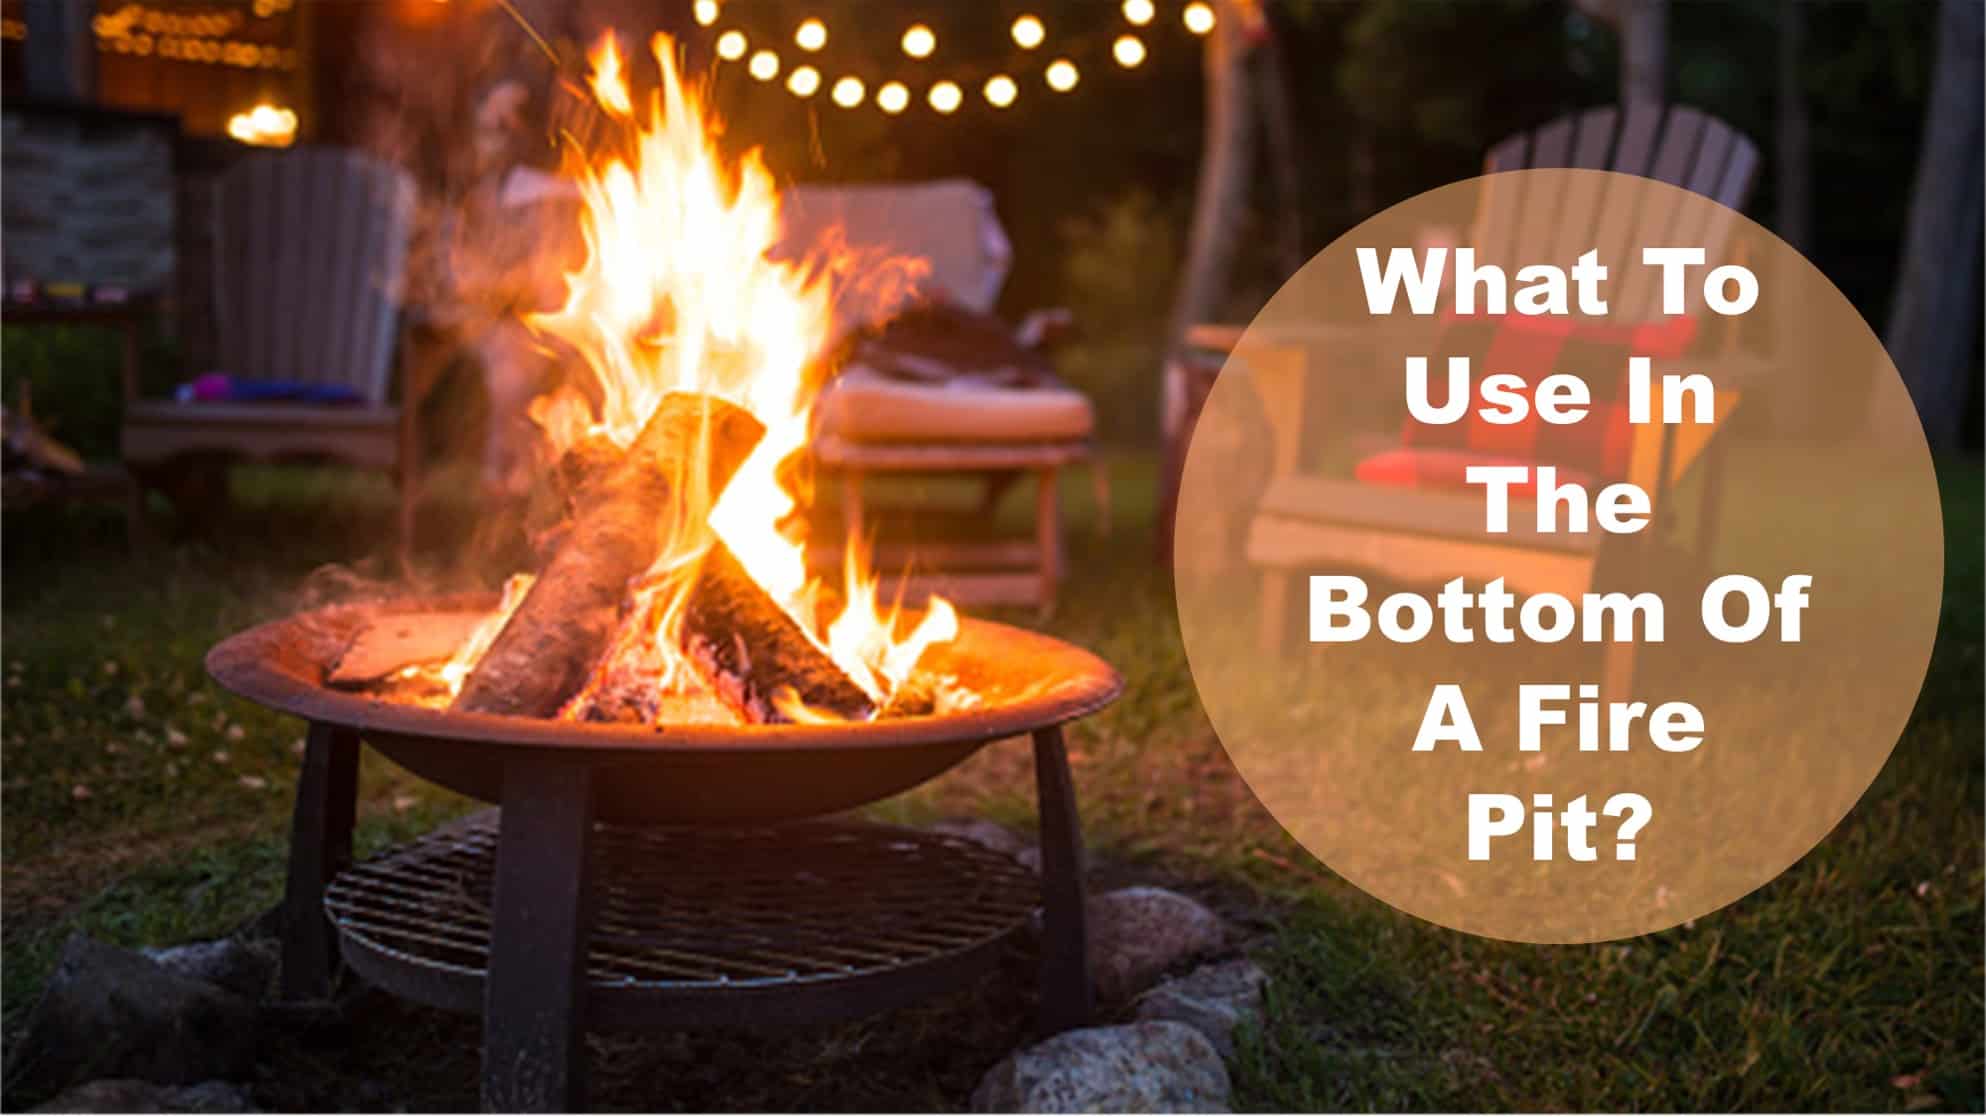 What To Use In The Bottom Of A Fire Pit? – DIY HOME GURU